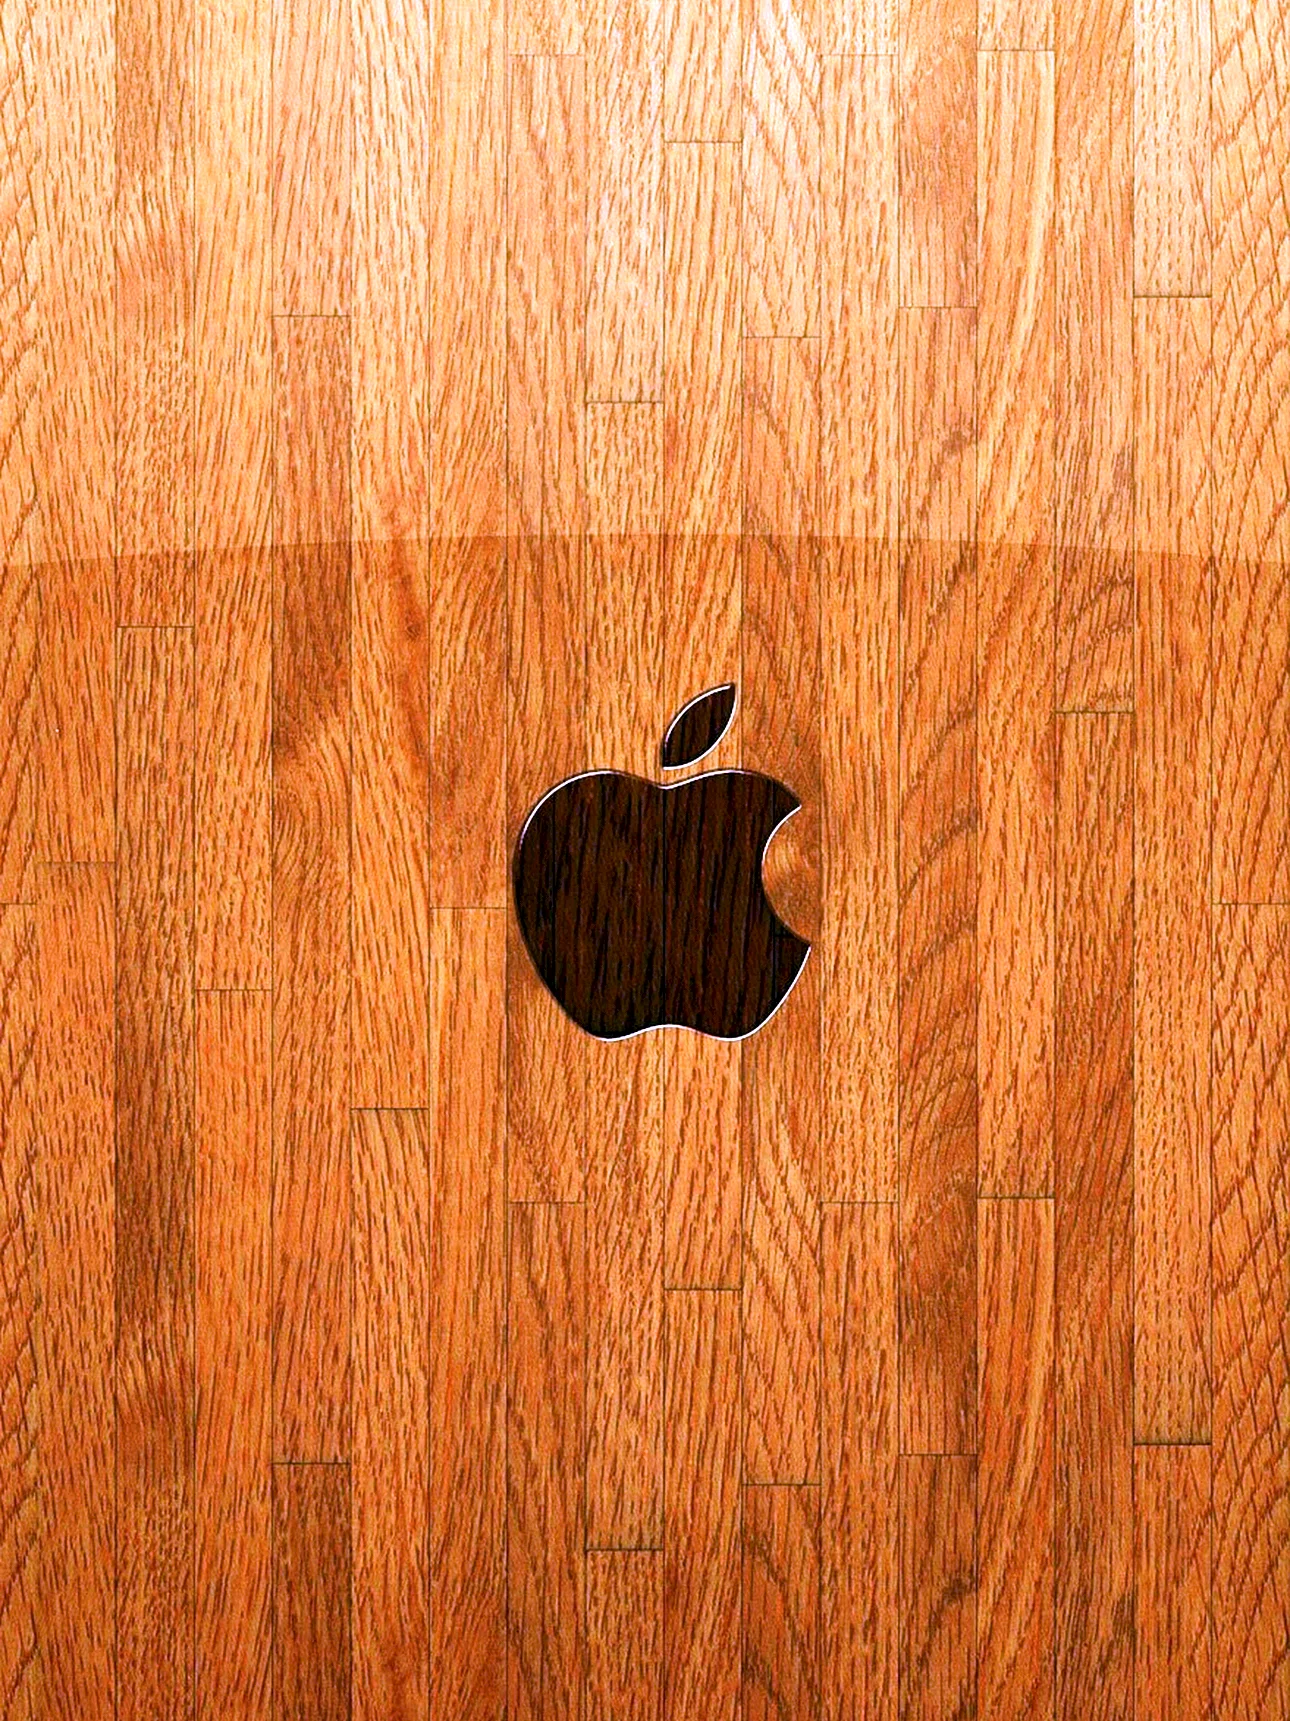 Apple Wood HD Wallpaper For iPhone